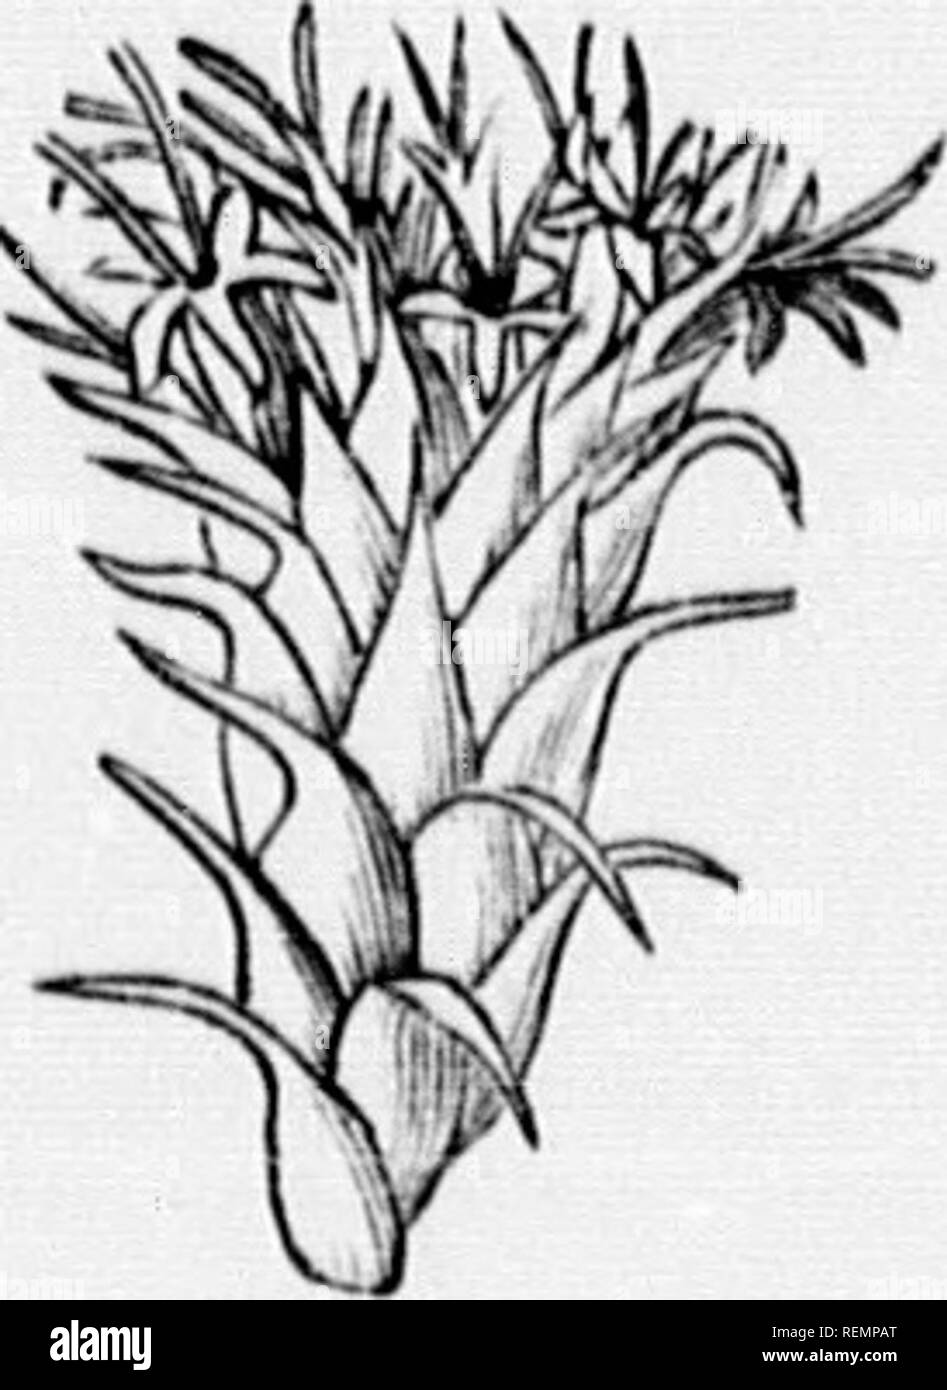 . High school botanical note book [microform]. Botany; Botanique. chaff BOTANICAL TERMS. Ray-Florets (always witl.out stamens). ^''â â¢^&quot;&quot;â¢'&quot;= 5, 10,20, o:,etc. Kind: (n)/y.WÂ« -^^ (d) *y//7Â«fe, marked wi.'h fiâe vertical lines. Disk-Florets. N.-.Mi...:u: 5, 10,20, =c, etc. KiM): perfect, .staminate, etc. Coi-oiru ; yellow, brown, etc. Pappi:.s : a.s for the ray-florets. Al-b all ,he way np (c) S&gt;,ucer.s,.ap.,. ve.y flat and .hallow. (d) tup-shaiml, Bvll-shapnl, etc. Fijr. 2ai. Fig. iai. Fig. 233. .Si) li. Please note that these images are extracted from scanned page images Stock Photo